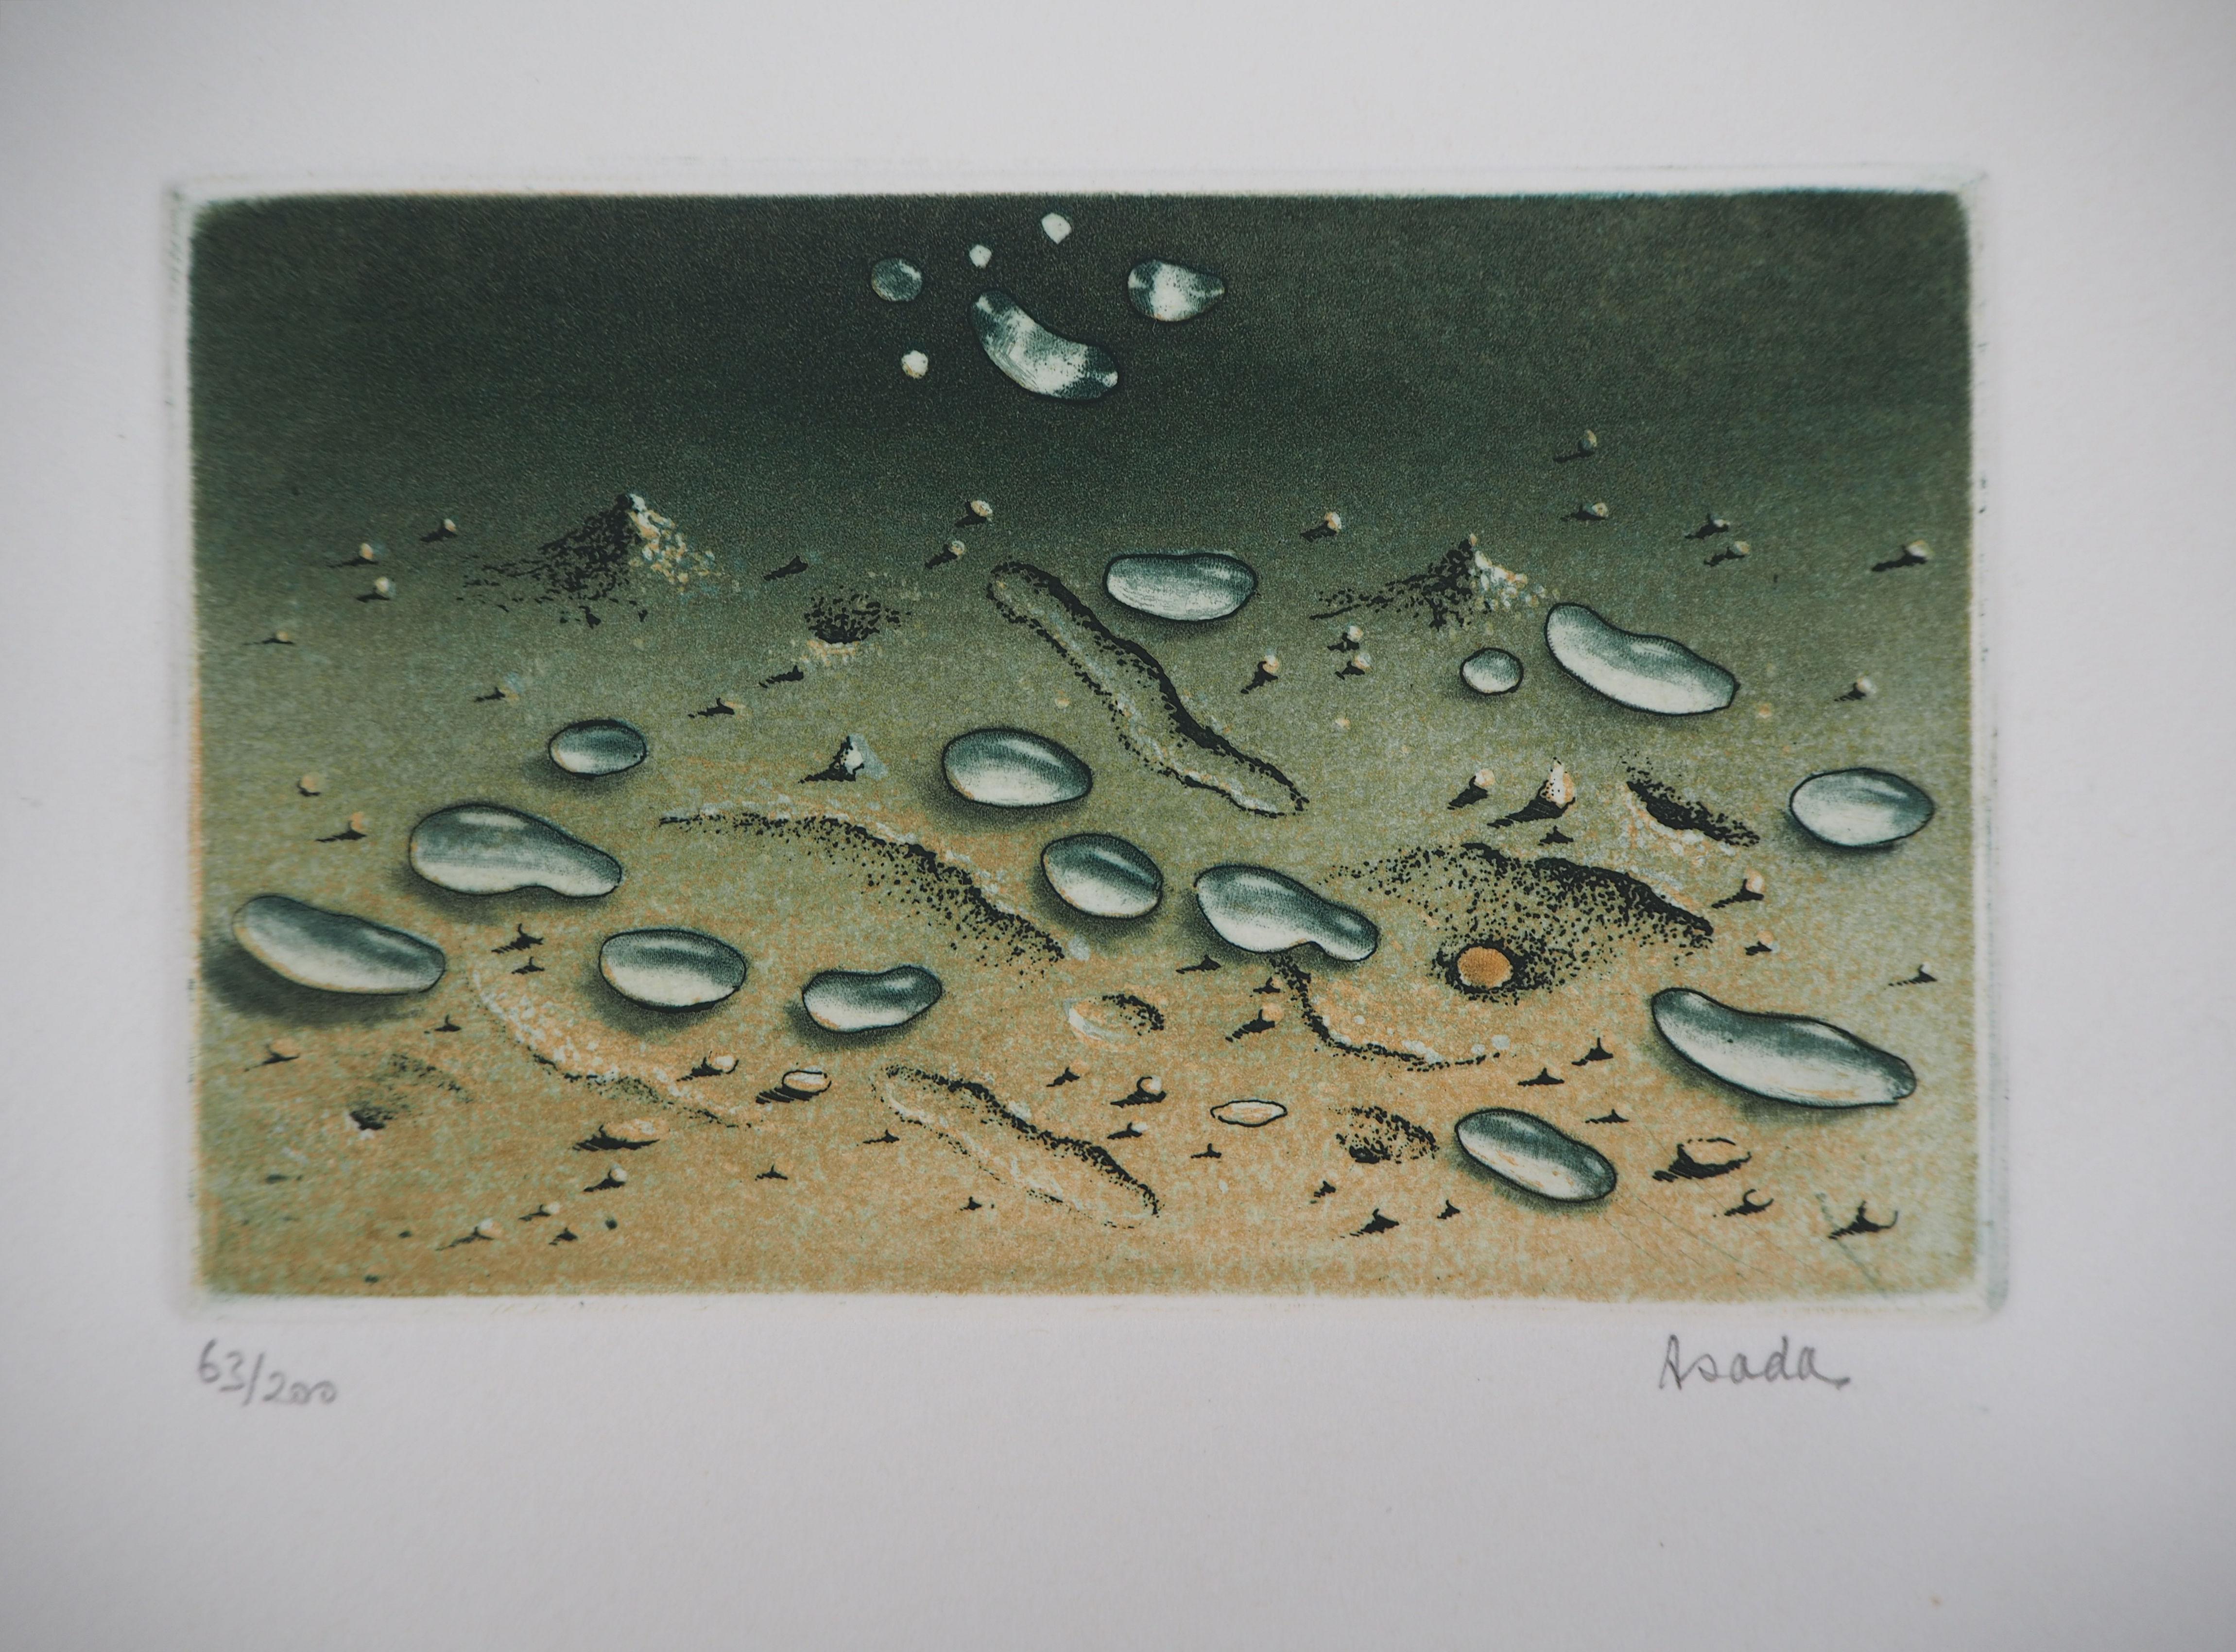 Zen : Water Drops on the Sand - Original handsigned etching - Numbered / 200 - Gray Figurative Print by Hiroshi Asada